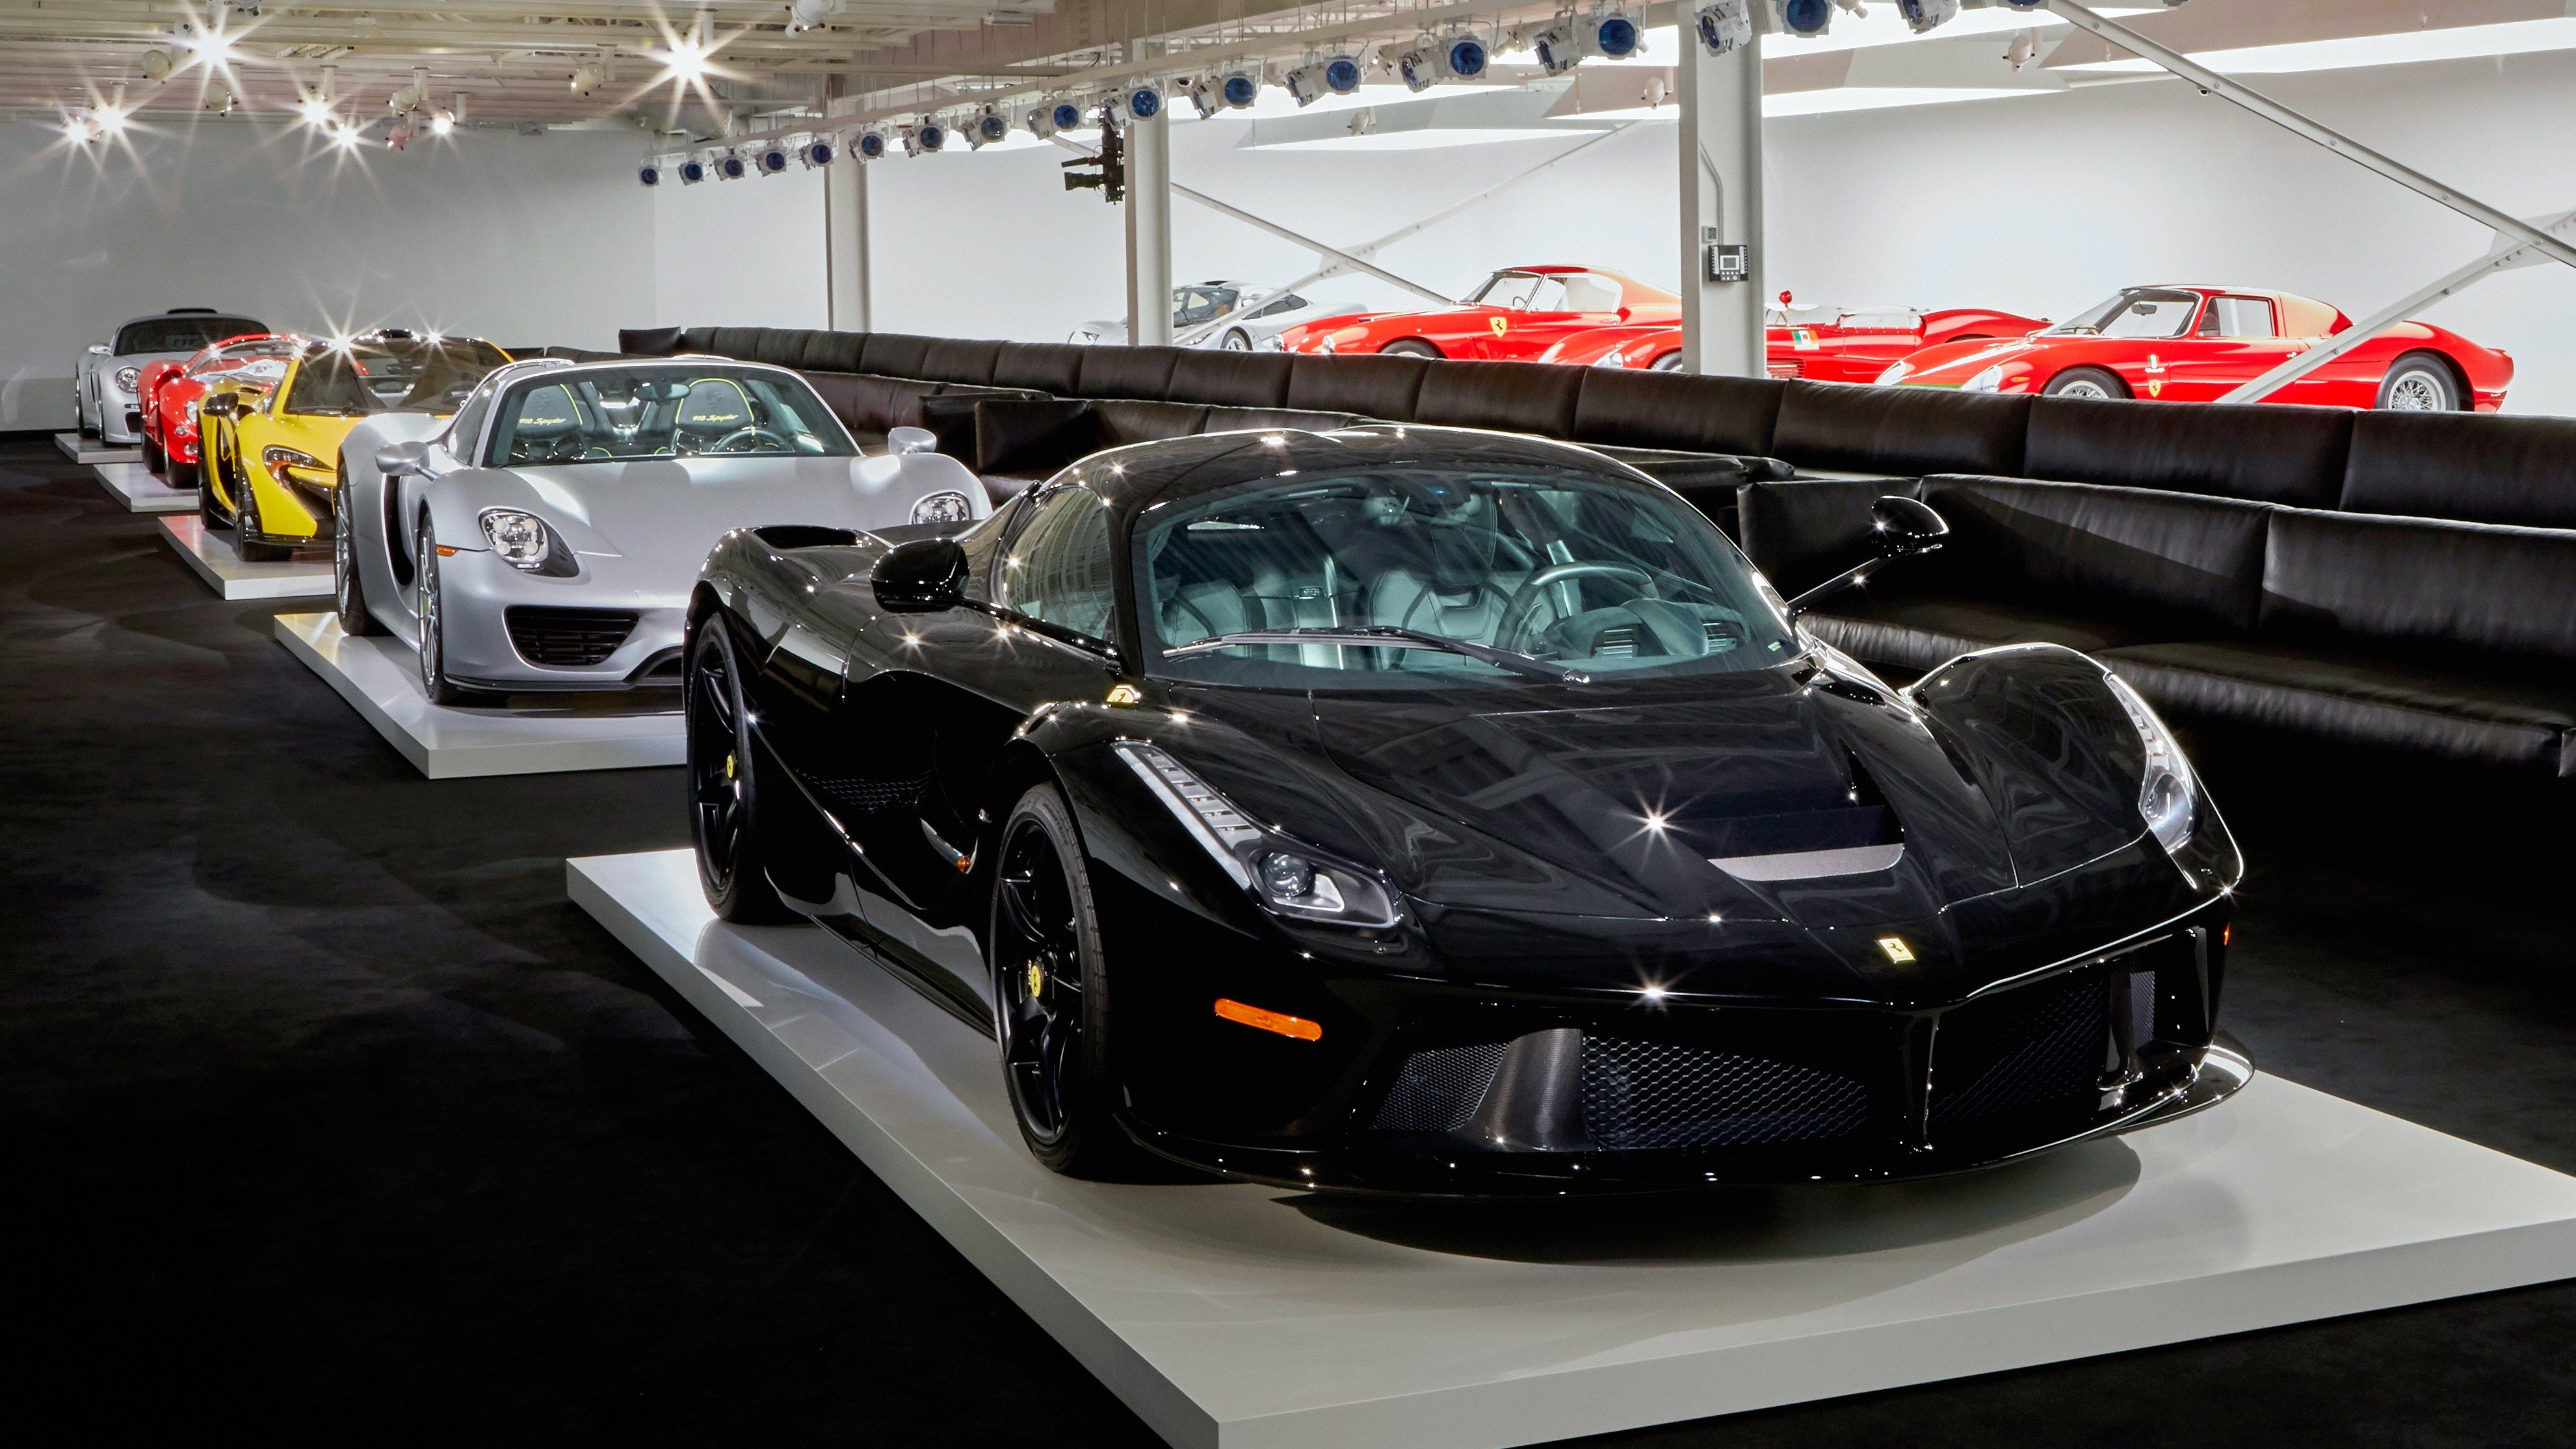 Curb appeal: 5 of the most exotic cars in Ralph Lauren’s secret garage